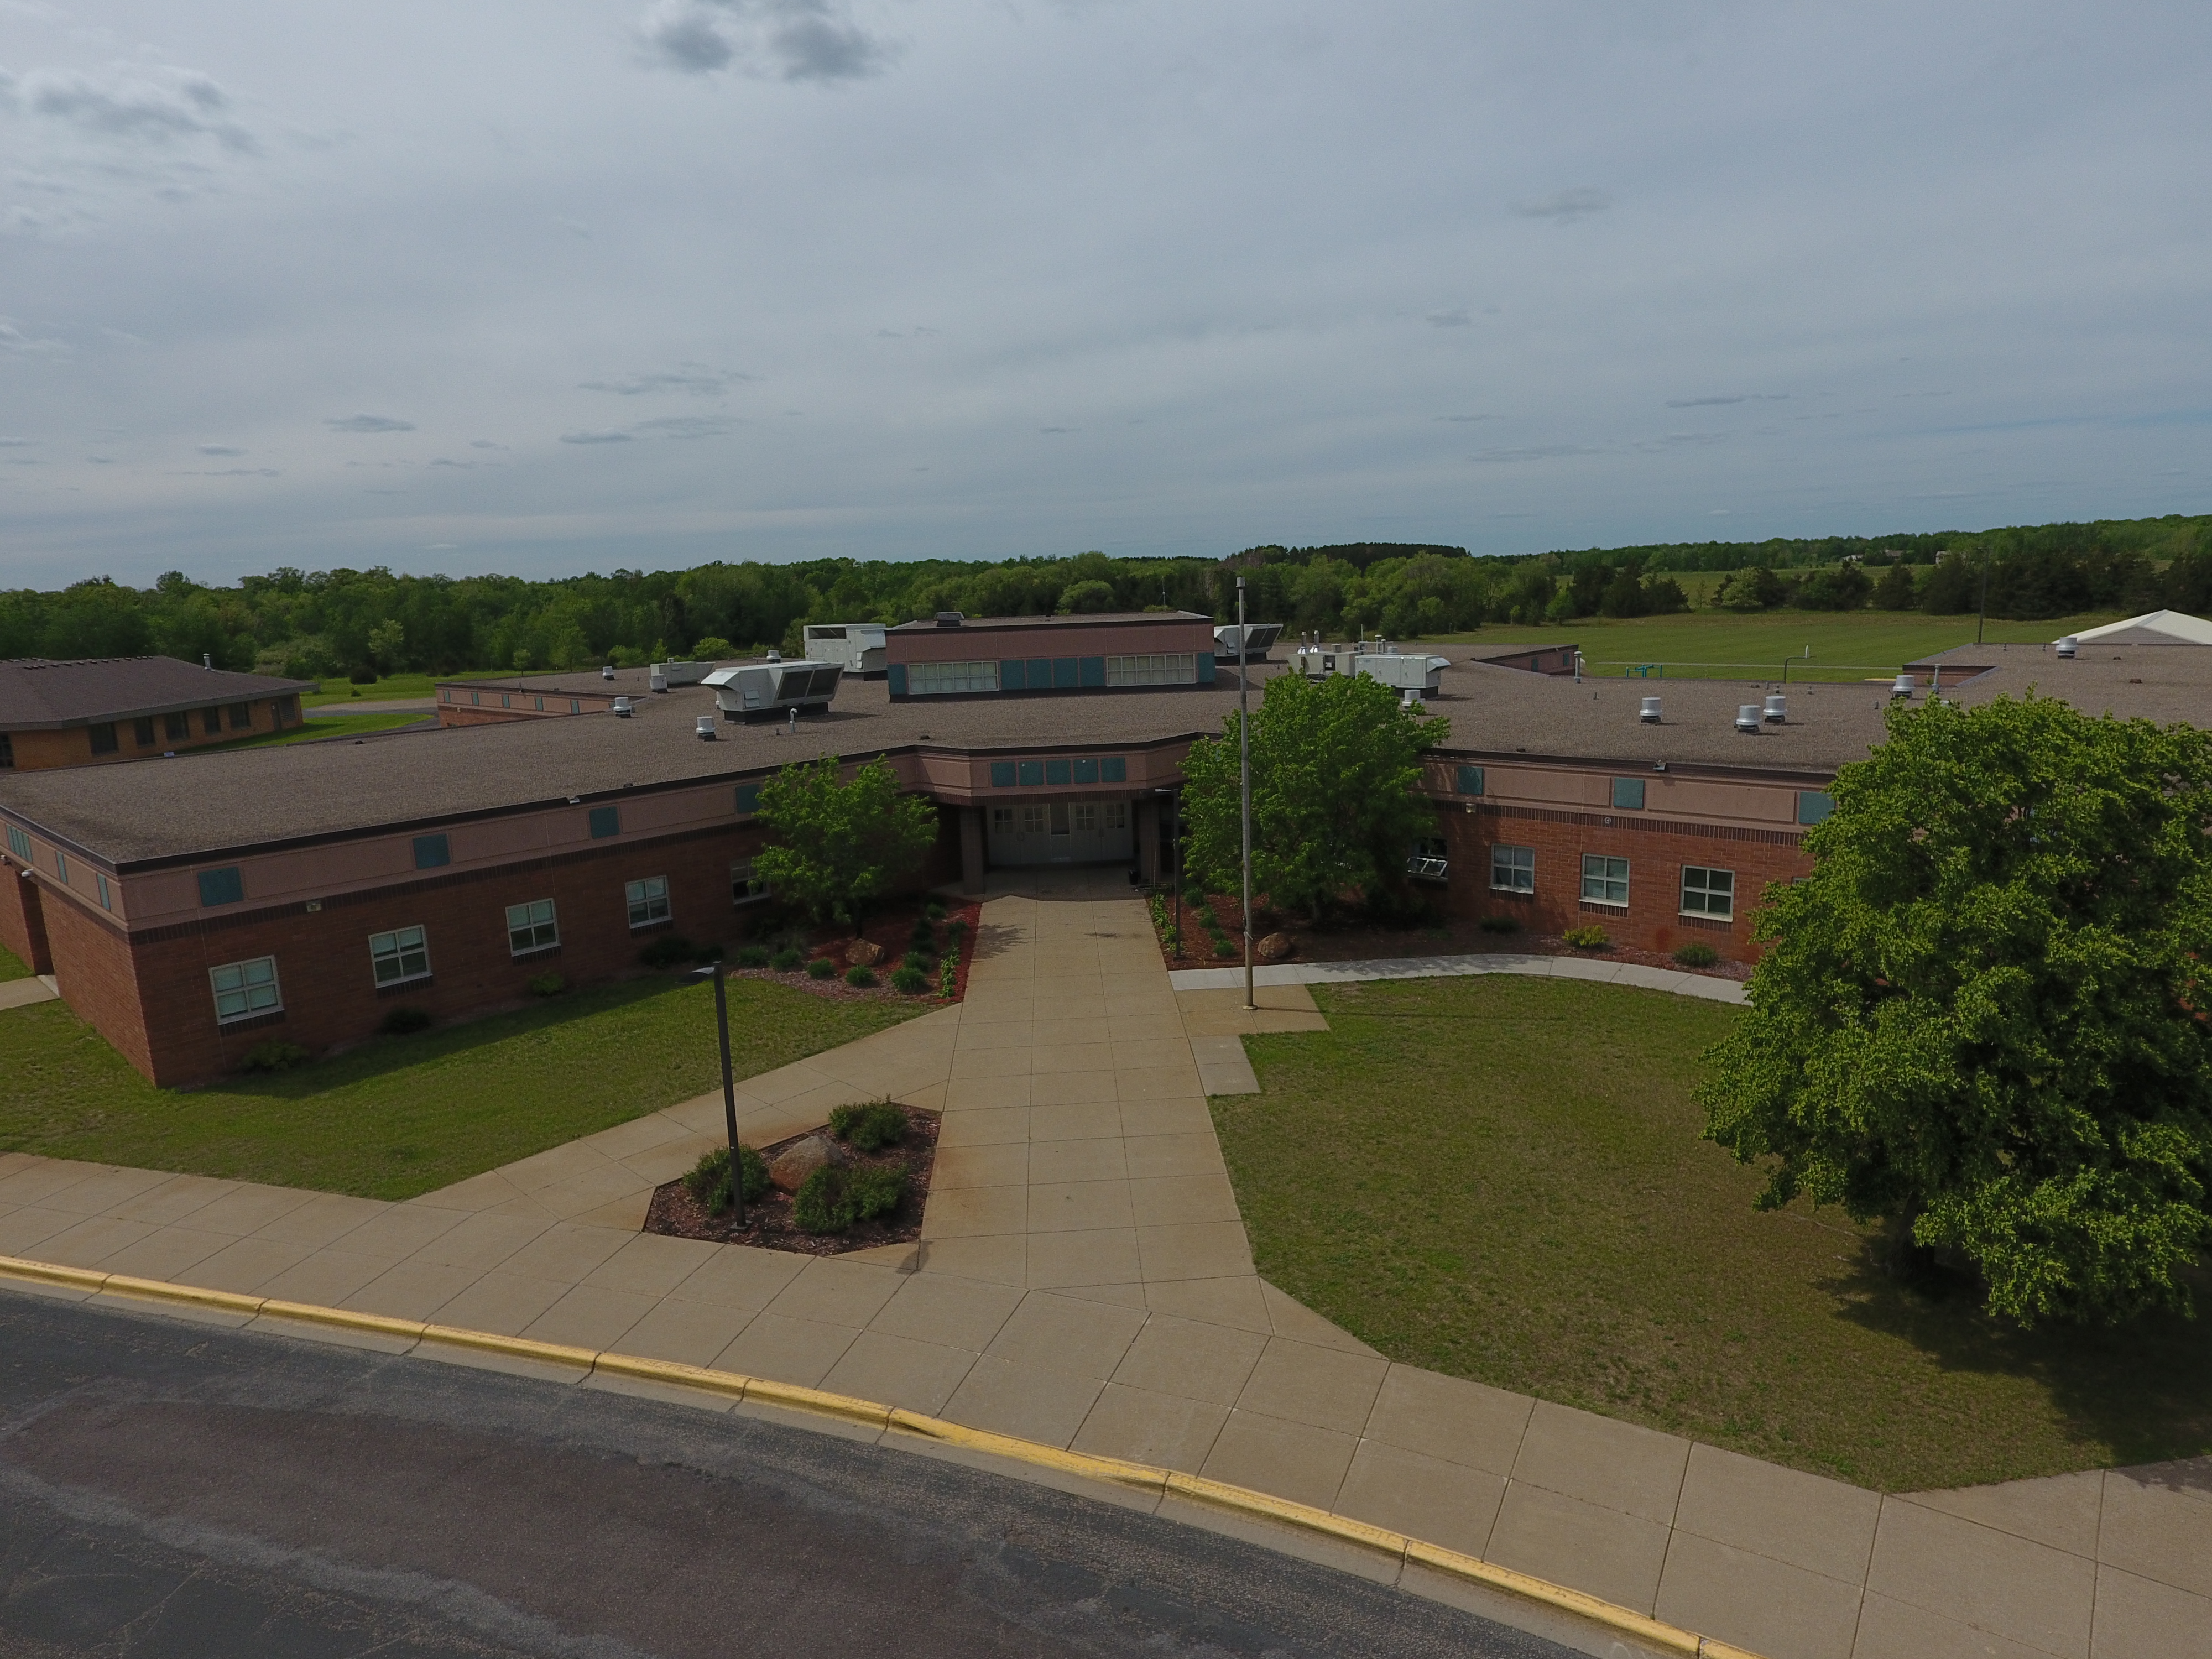 Image: Ariel Shot of the St. Francis Learning Center